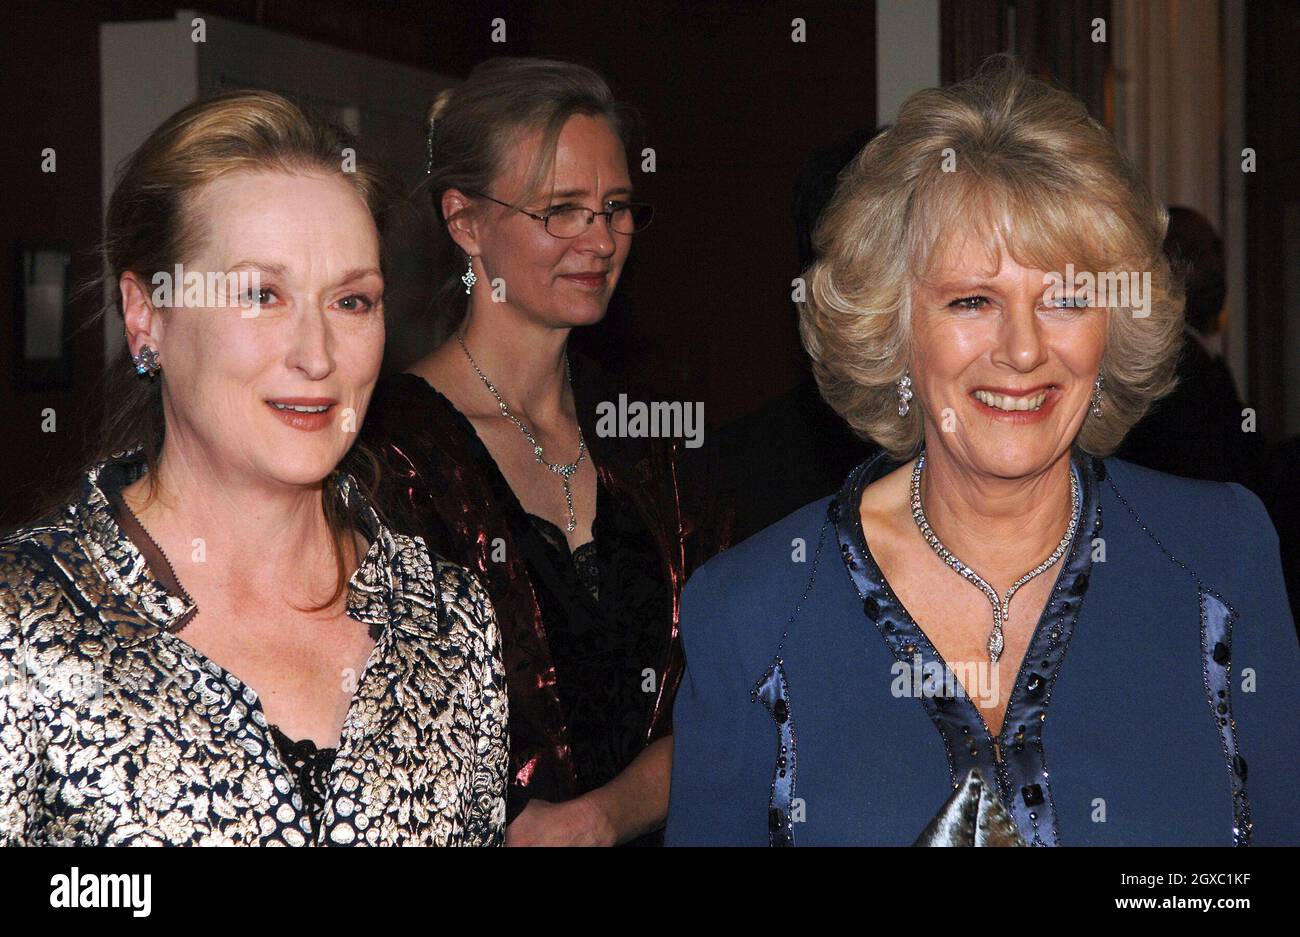 Camilla, Duchess of Cornwall meets actress Meryl Streep at the Harvard Club where Prince Charles, Prince of Wales will receive the Global Environmental Citizen Award from Harvard medical School's Center for Health and the Global Environment on January 28, 2007 in New York. Anwar Hussein/EMPICS Entertainment  Stock Photo